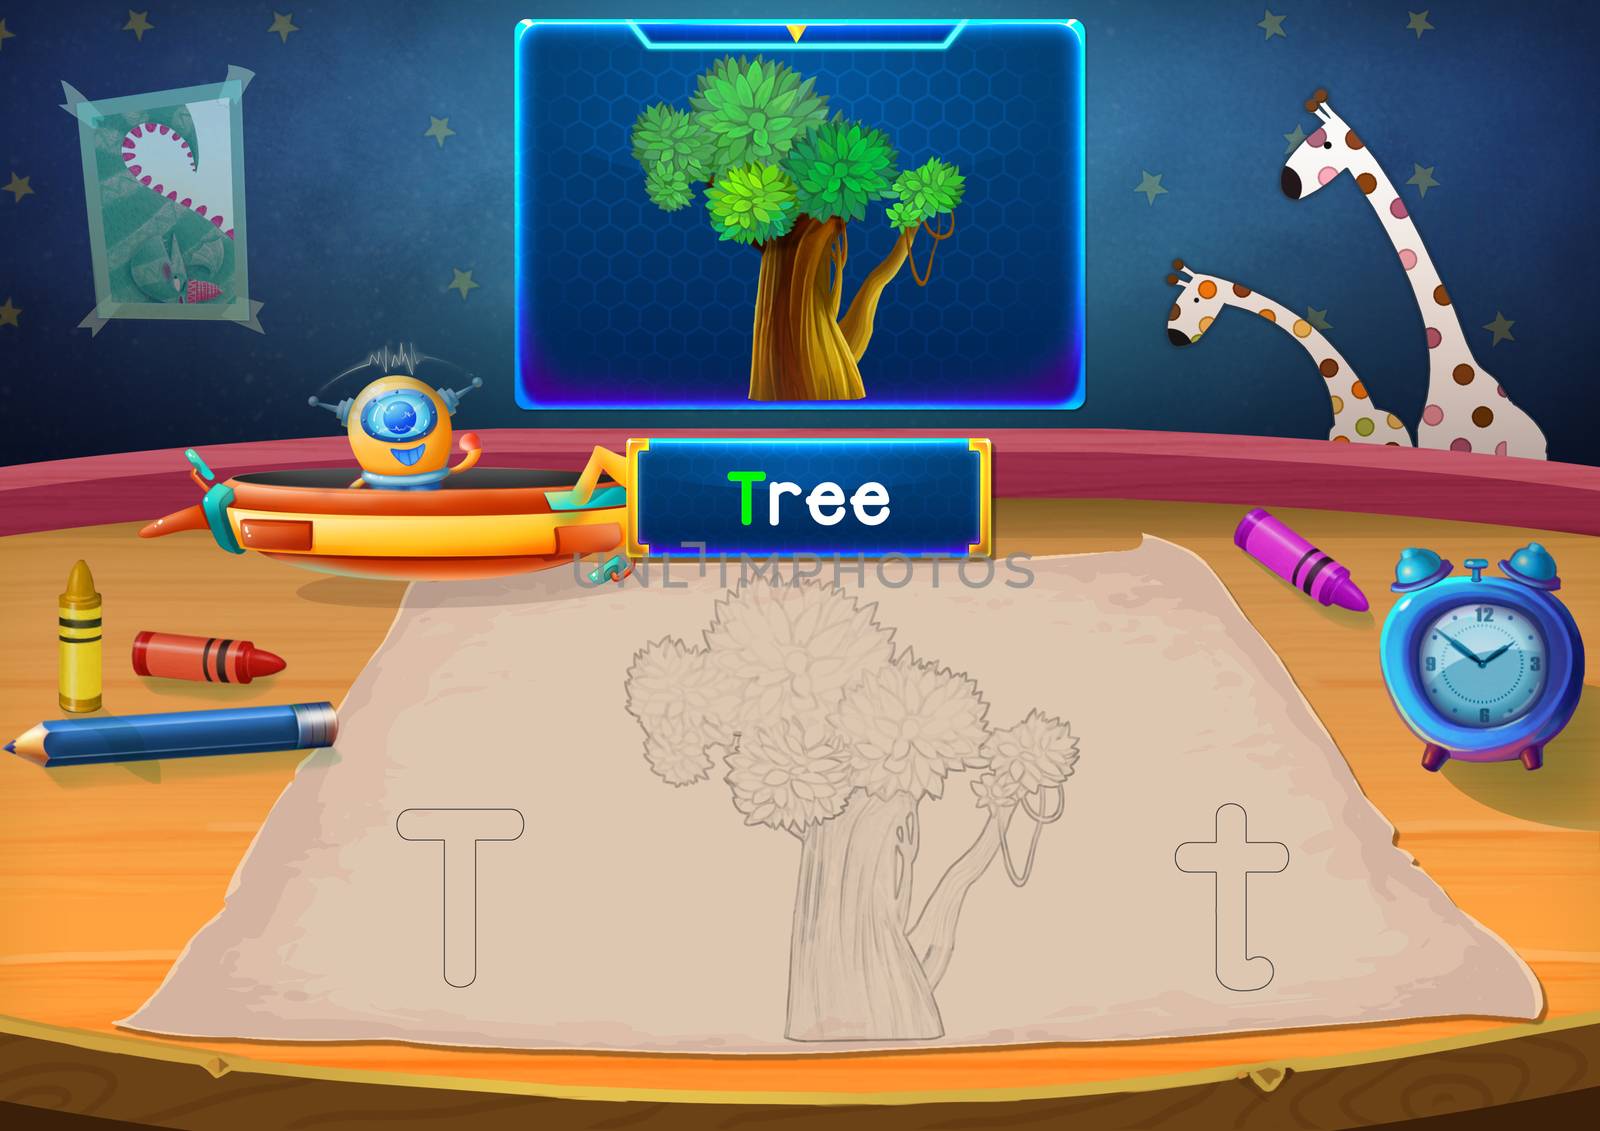 Illustration: Martian Class: T - Tree. The Martian in this picture opens a class for all Aliens. You must follow and use crayons coloring the outlines below. Fantastic Sci-Fi Cartoon Scene Design.